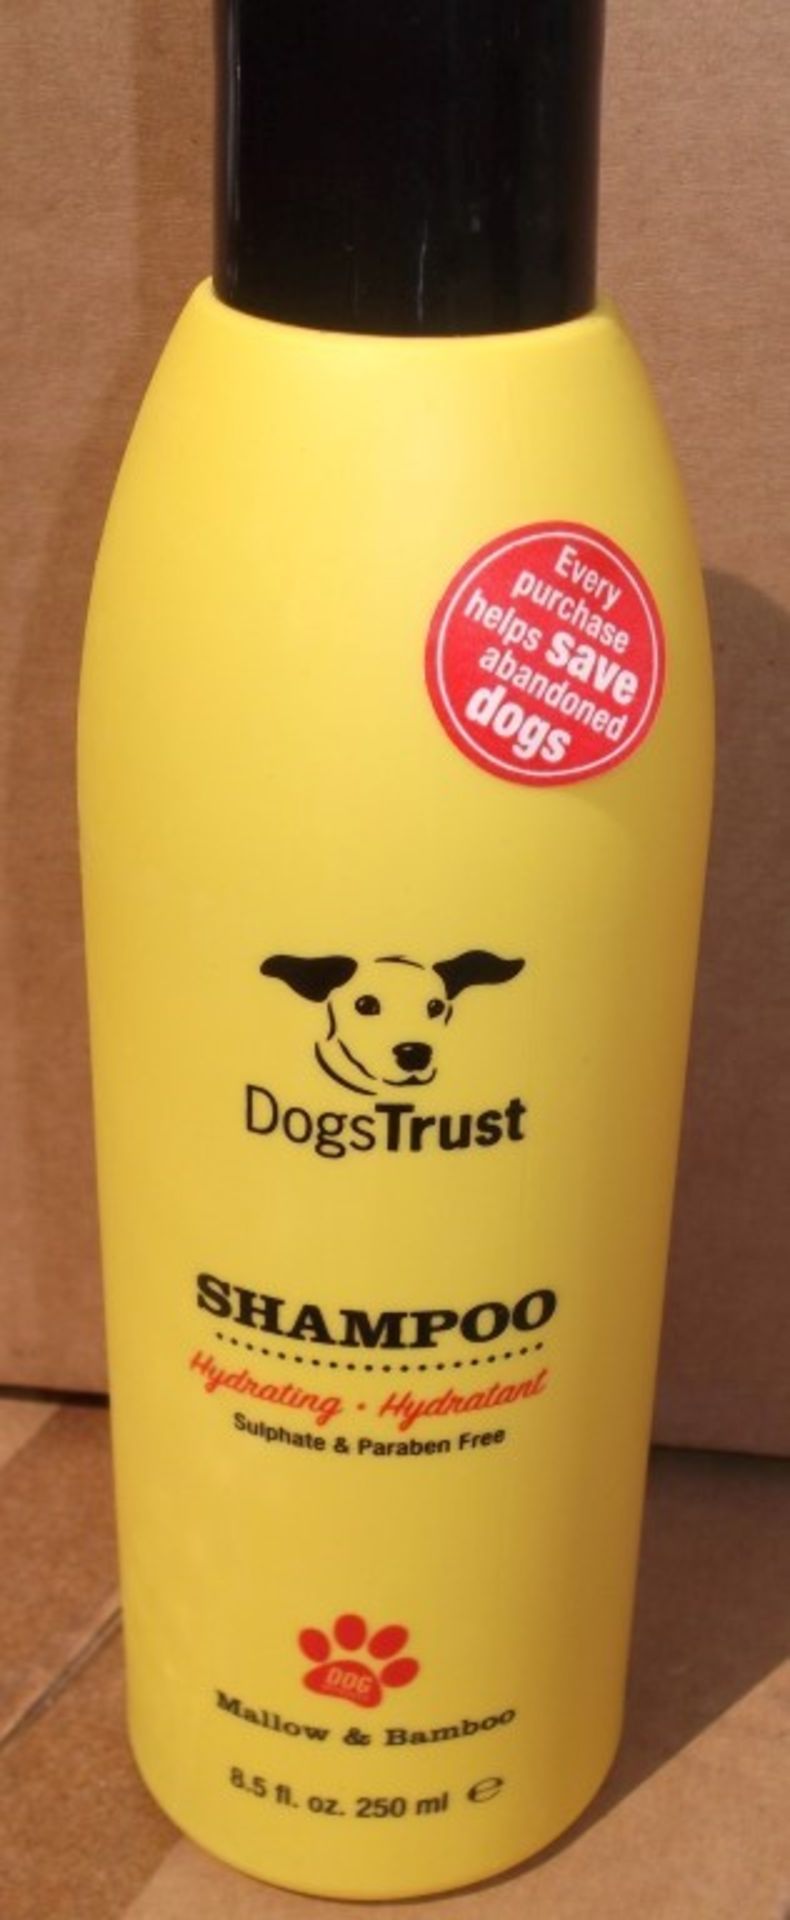 60 x Various Dogs Trust Shampoos and Conditioners - Brand New Stock - CL028 - Includes No Tears, - Image 15 of 16